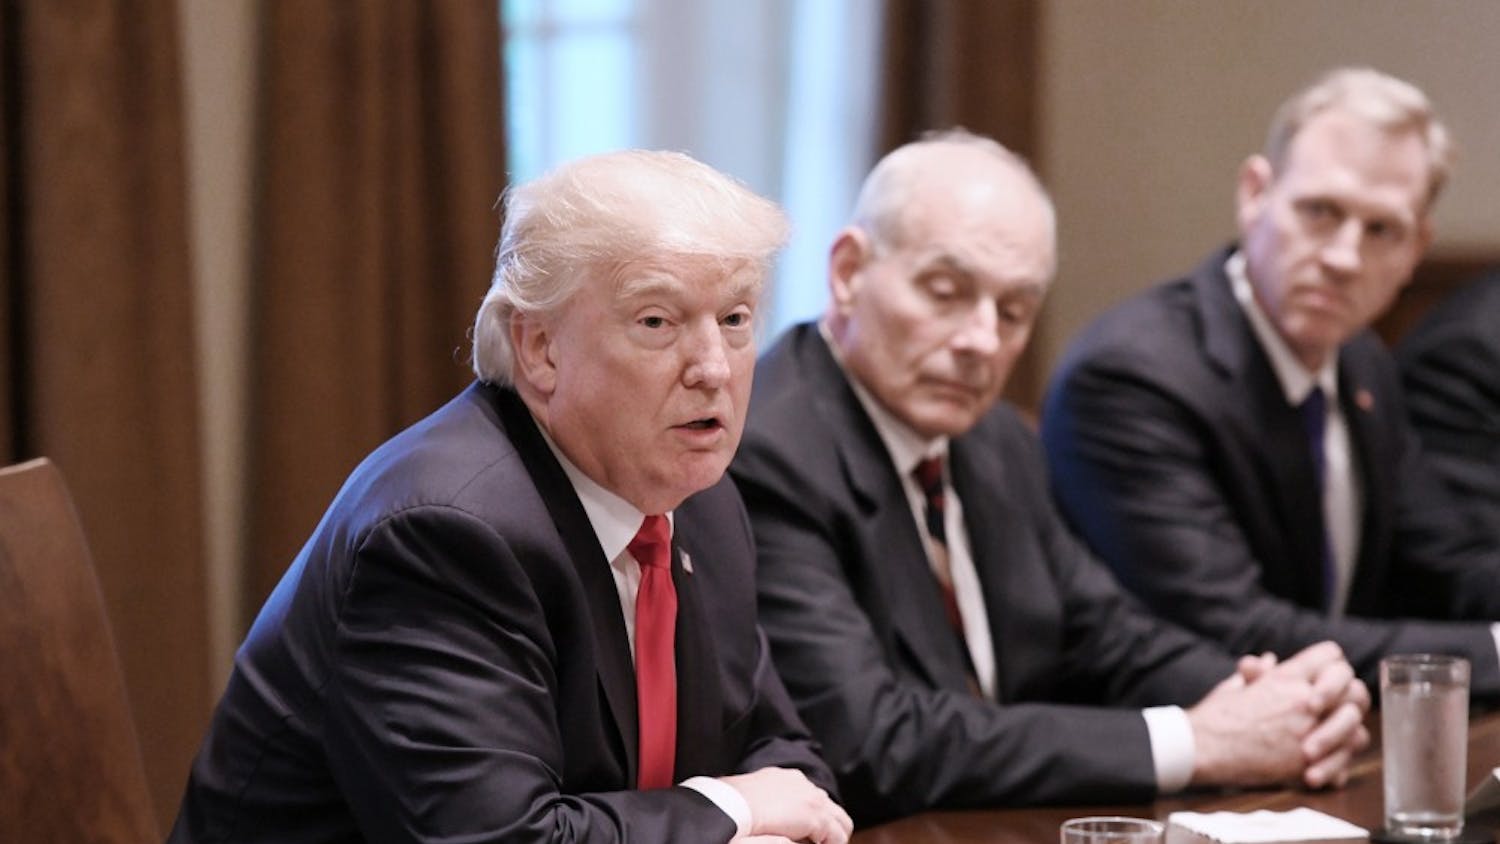 President Donald Trump speaks as White House chief of staff John Kelly looks on during a briefing with senior military leaders in the Cabinet Room at the White House in Washington, D.C., on October 5, 2017. (Olivier Douliery/Abaca Press/TNS)